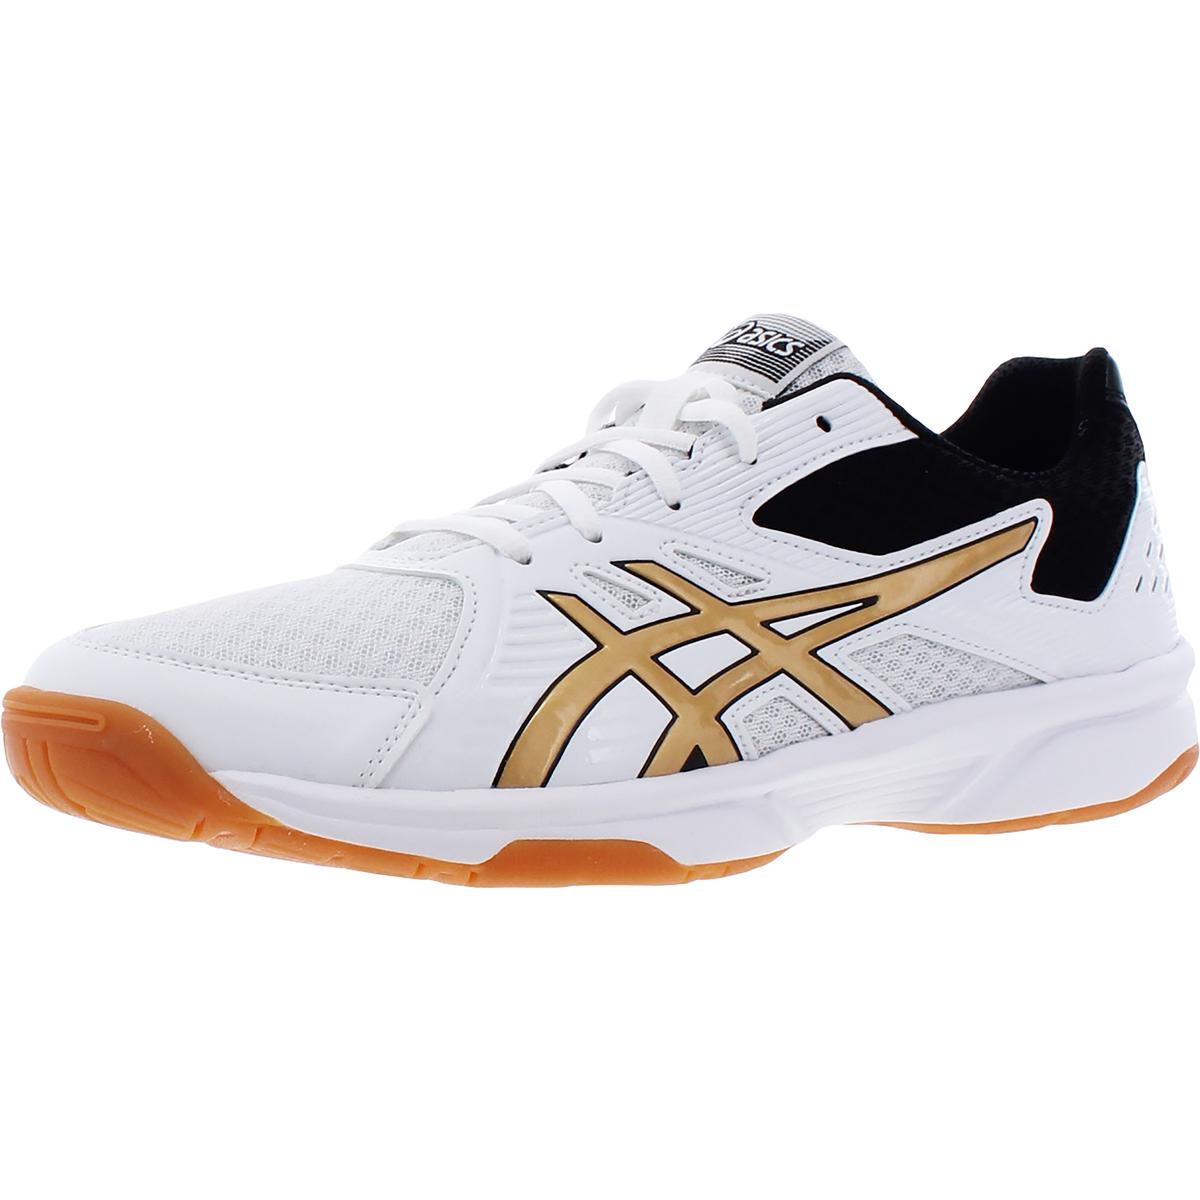 Asics Womens Upcourt 3 White Volleyball Shoes Sneakers 11 Medium (B,M ...